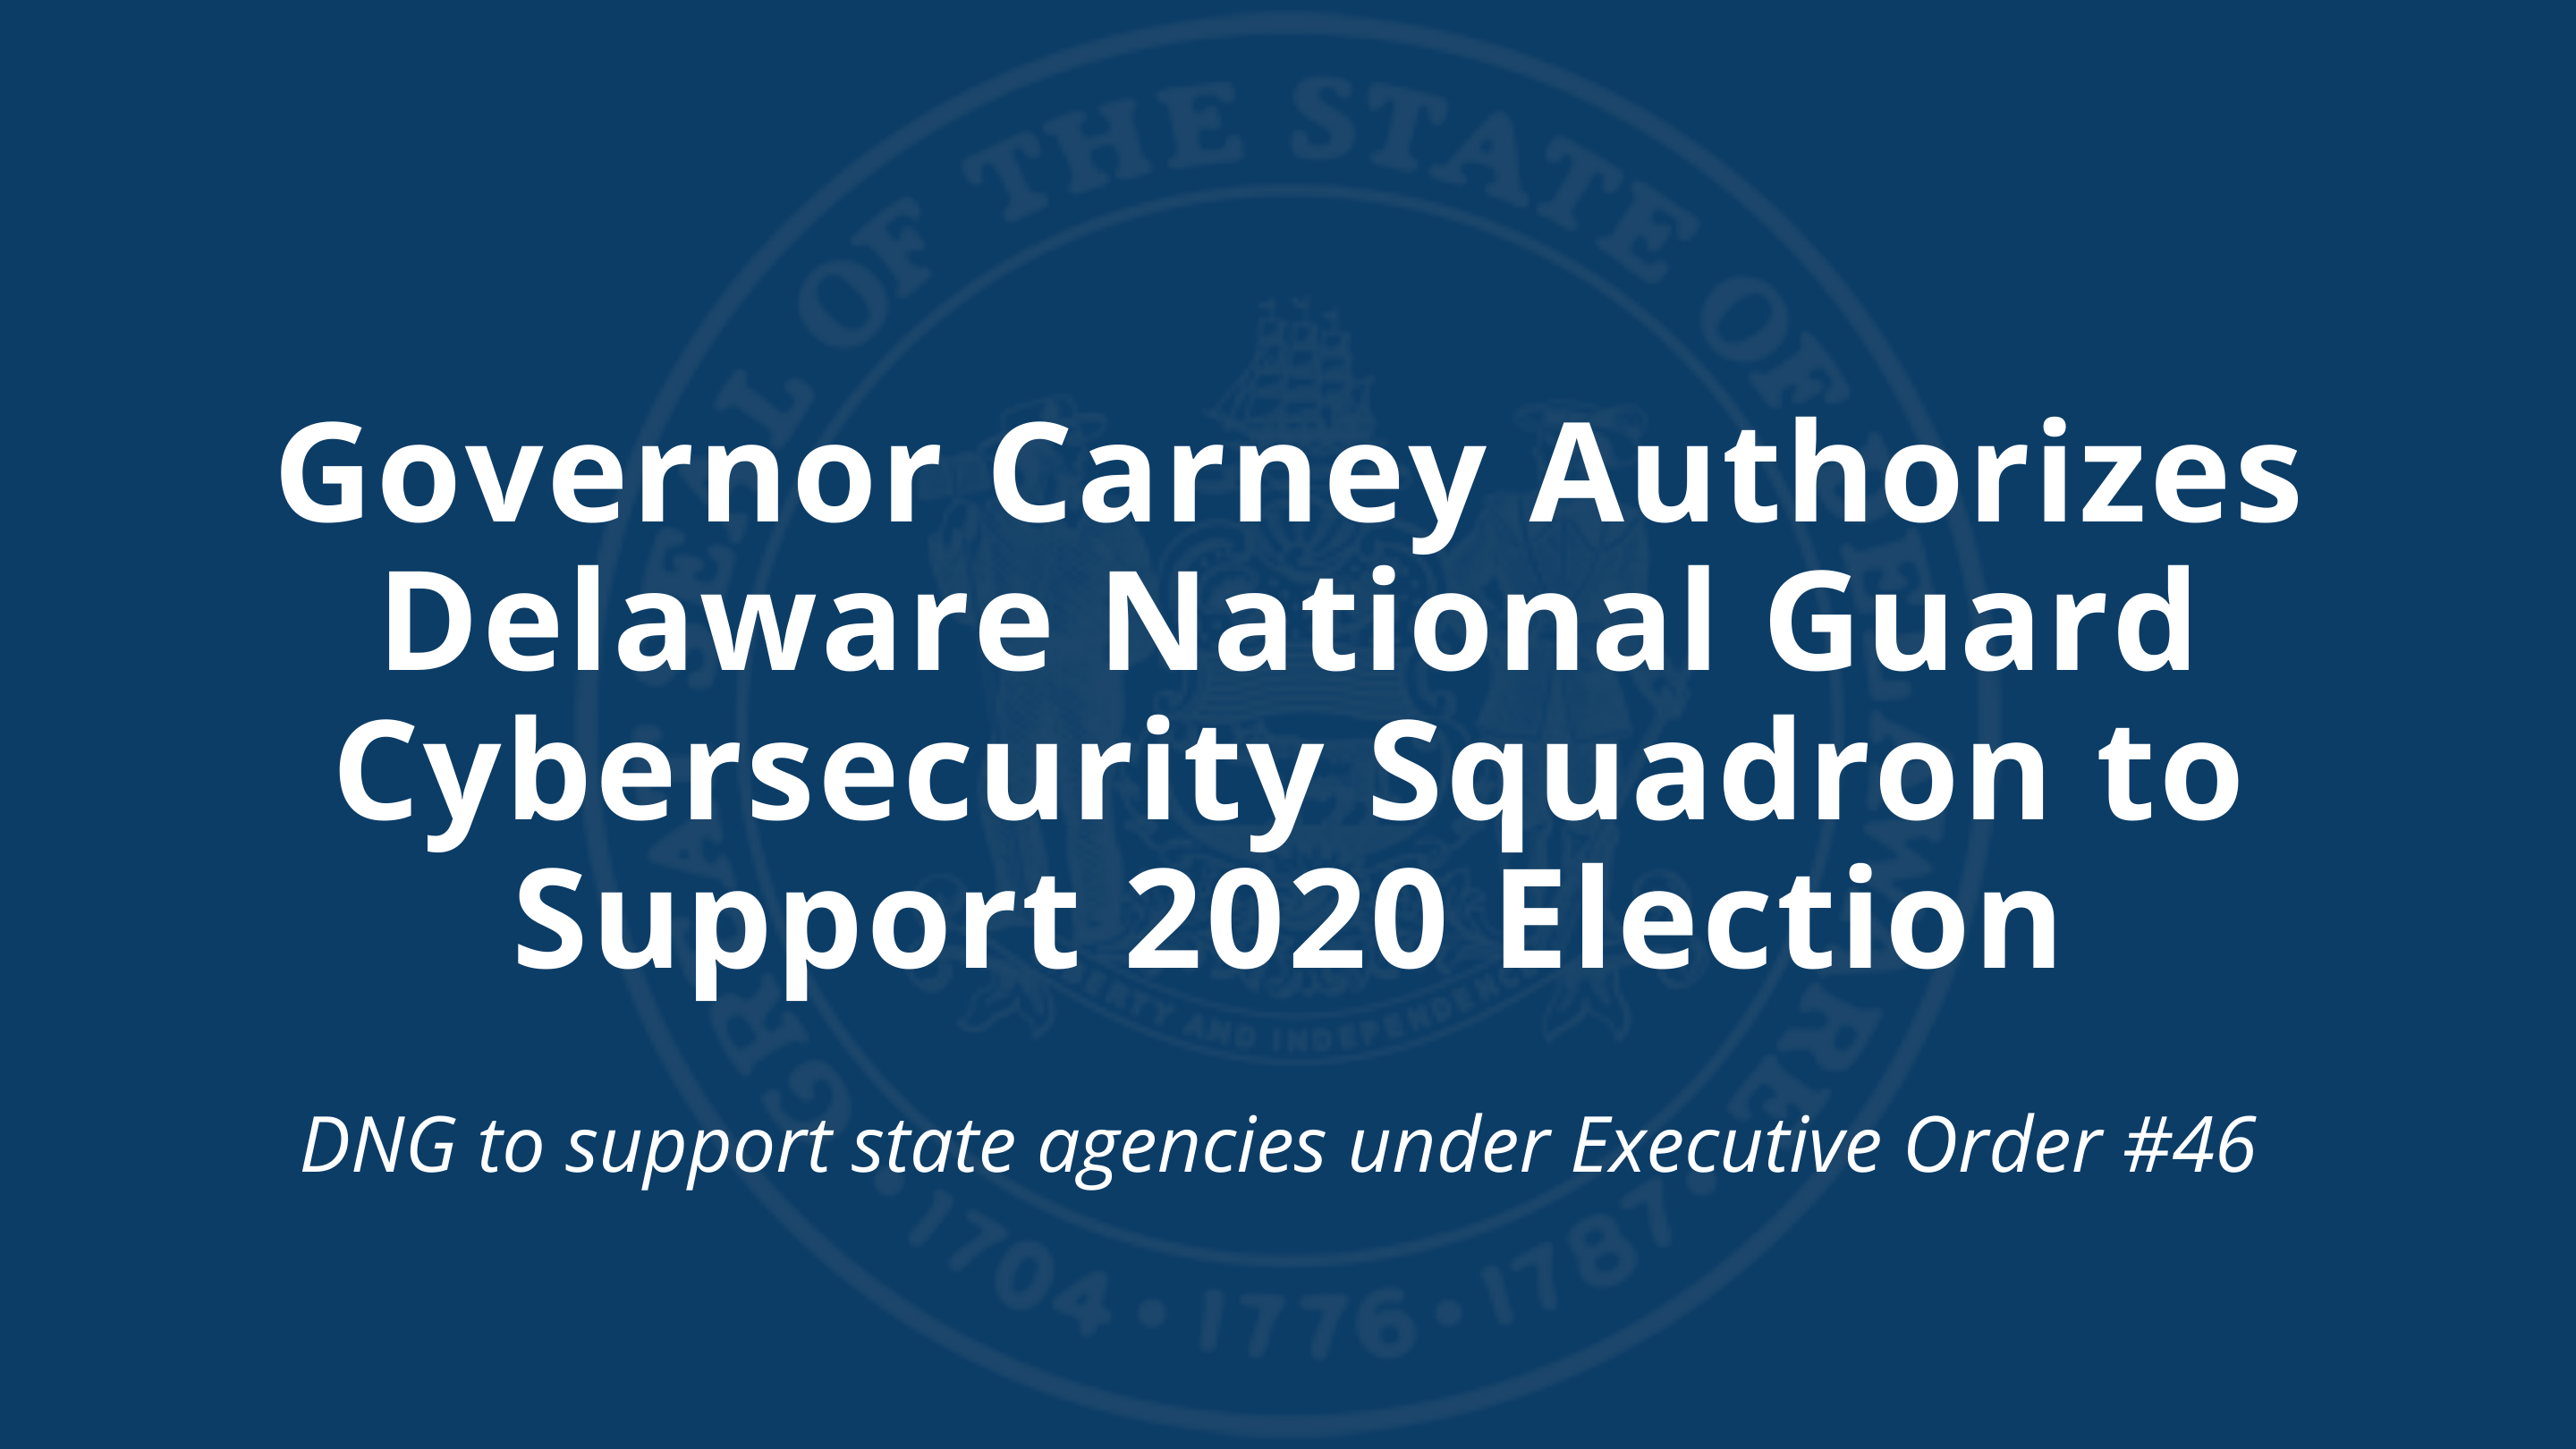 Governor Carney Authorizes Delaware National Guard Cybersecurity Squadron to Support 2020 Election